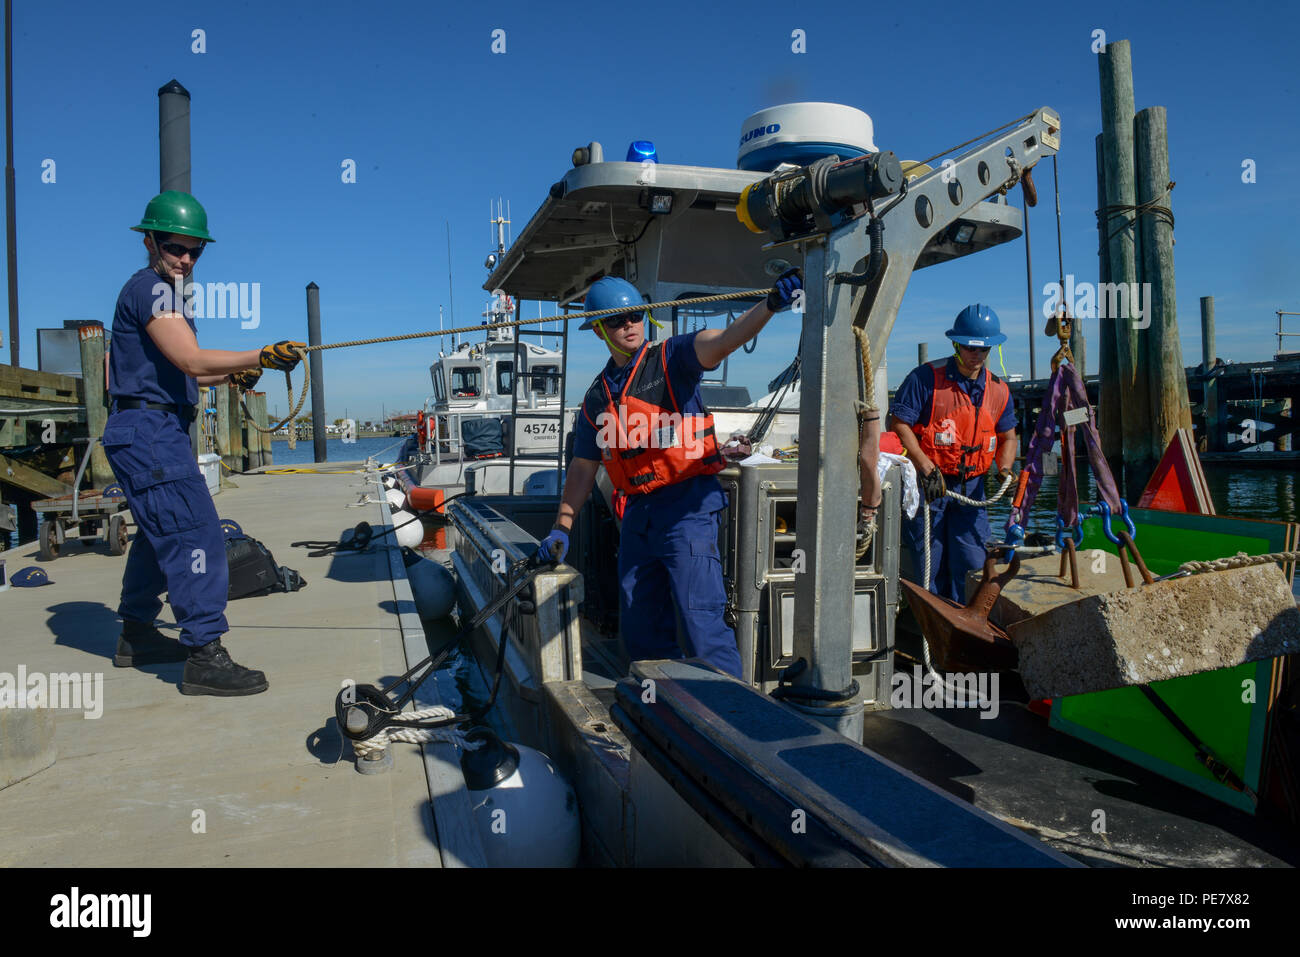 Left to right - Fireman Brittany Barba, Petty Officer 2nd Class Justin Thornton, and Petty Officer 3rd Class Collin Blugis conduct a dynamic load test on the crane onboard the 26-Foot Trailerable Aids to Navigation Boat from Coast Guard Aids to Navigation Team Crisfield, Md., Wednesday, Oct. 21, 2015. Crew members from ANT Crisfield were performing davit inspections, as well as static and dynamic load tests for the crane aboard the TANB.  (U.S. Coast Guard photo by Petty Officer 2nd Class David Marin) Stock Photo